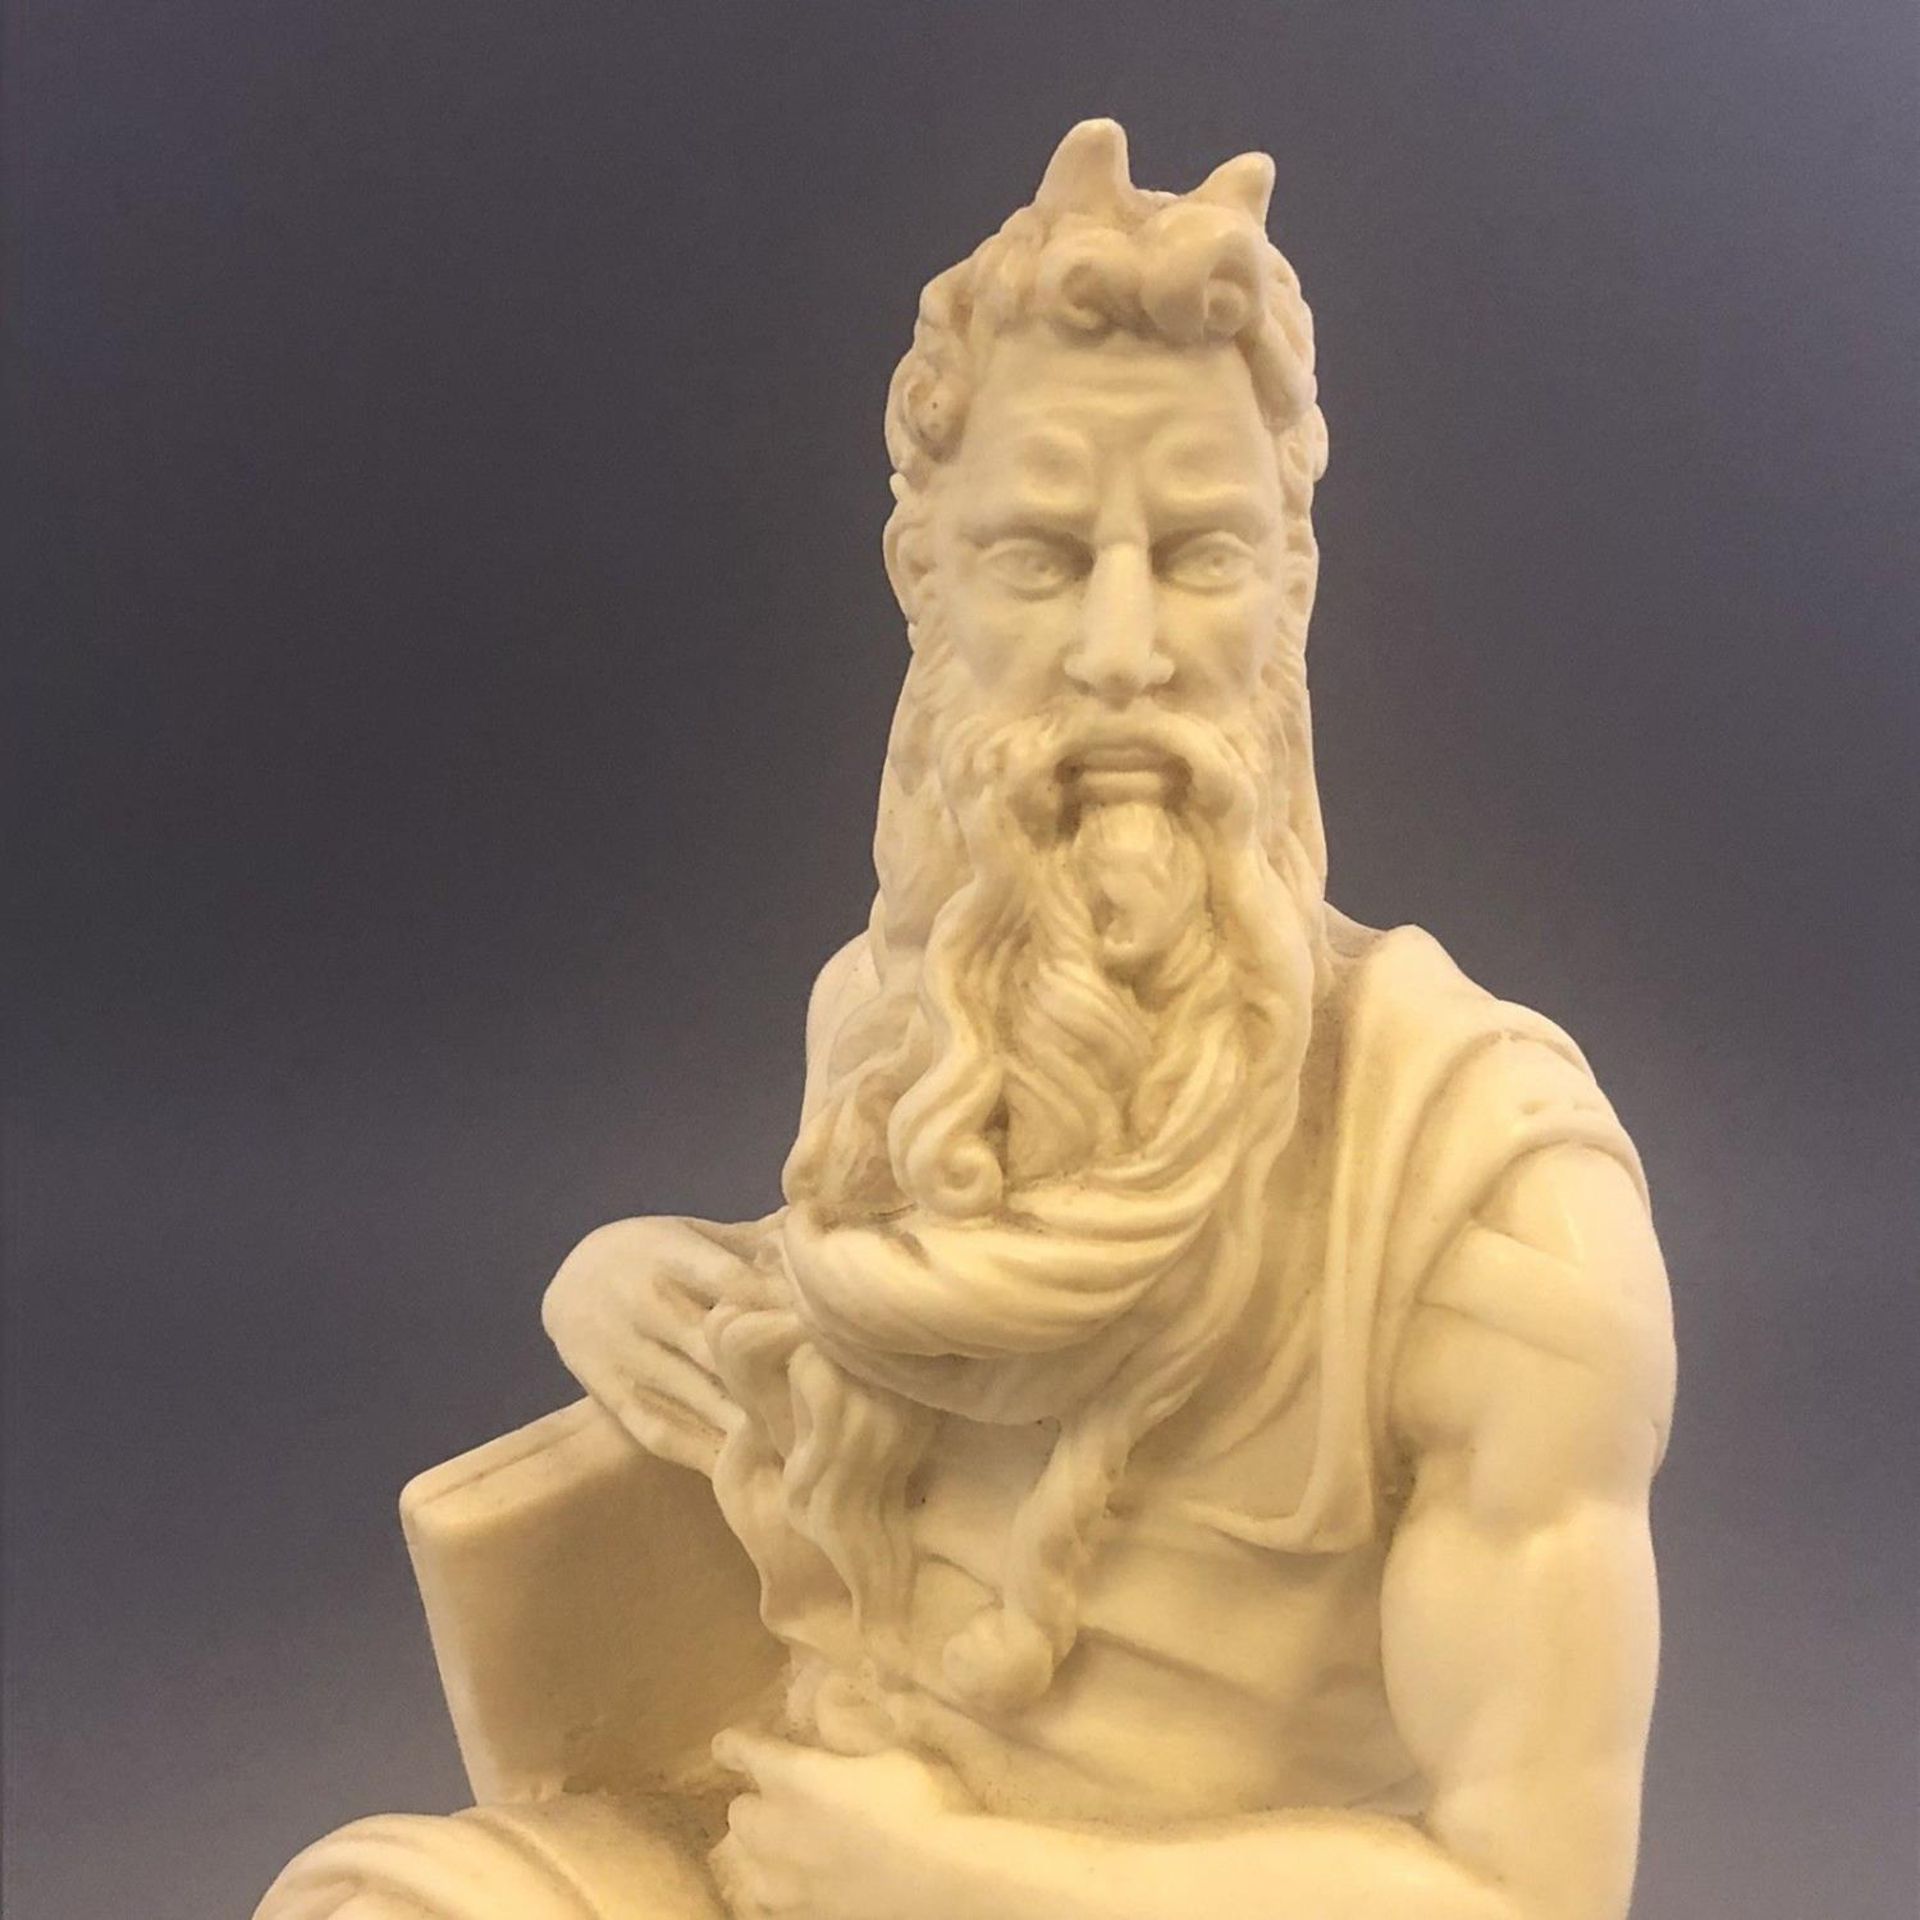 Vintage Italian Resin Statue Figurine - Michelangelo's Horned Moses - Image 2 of 7